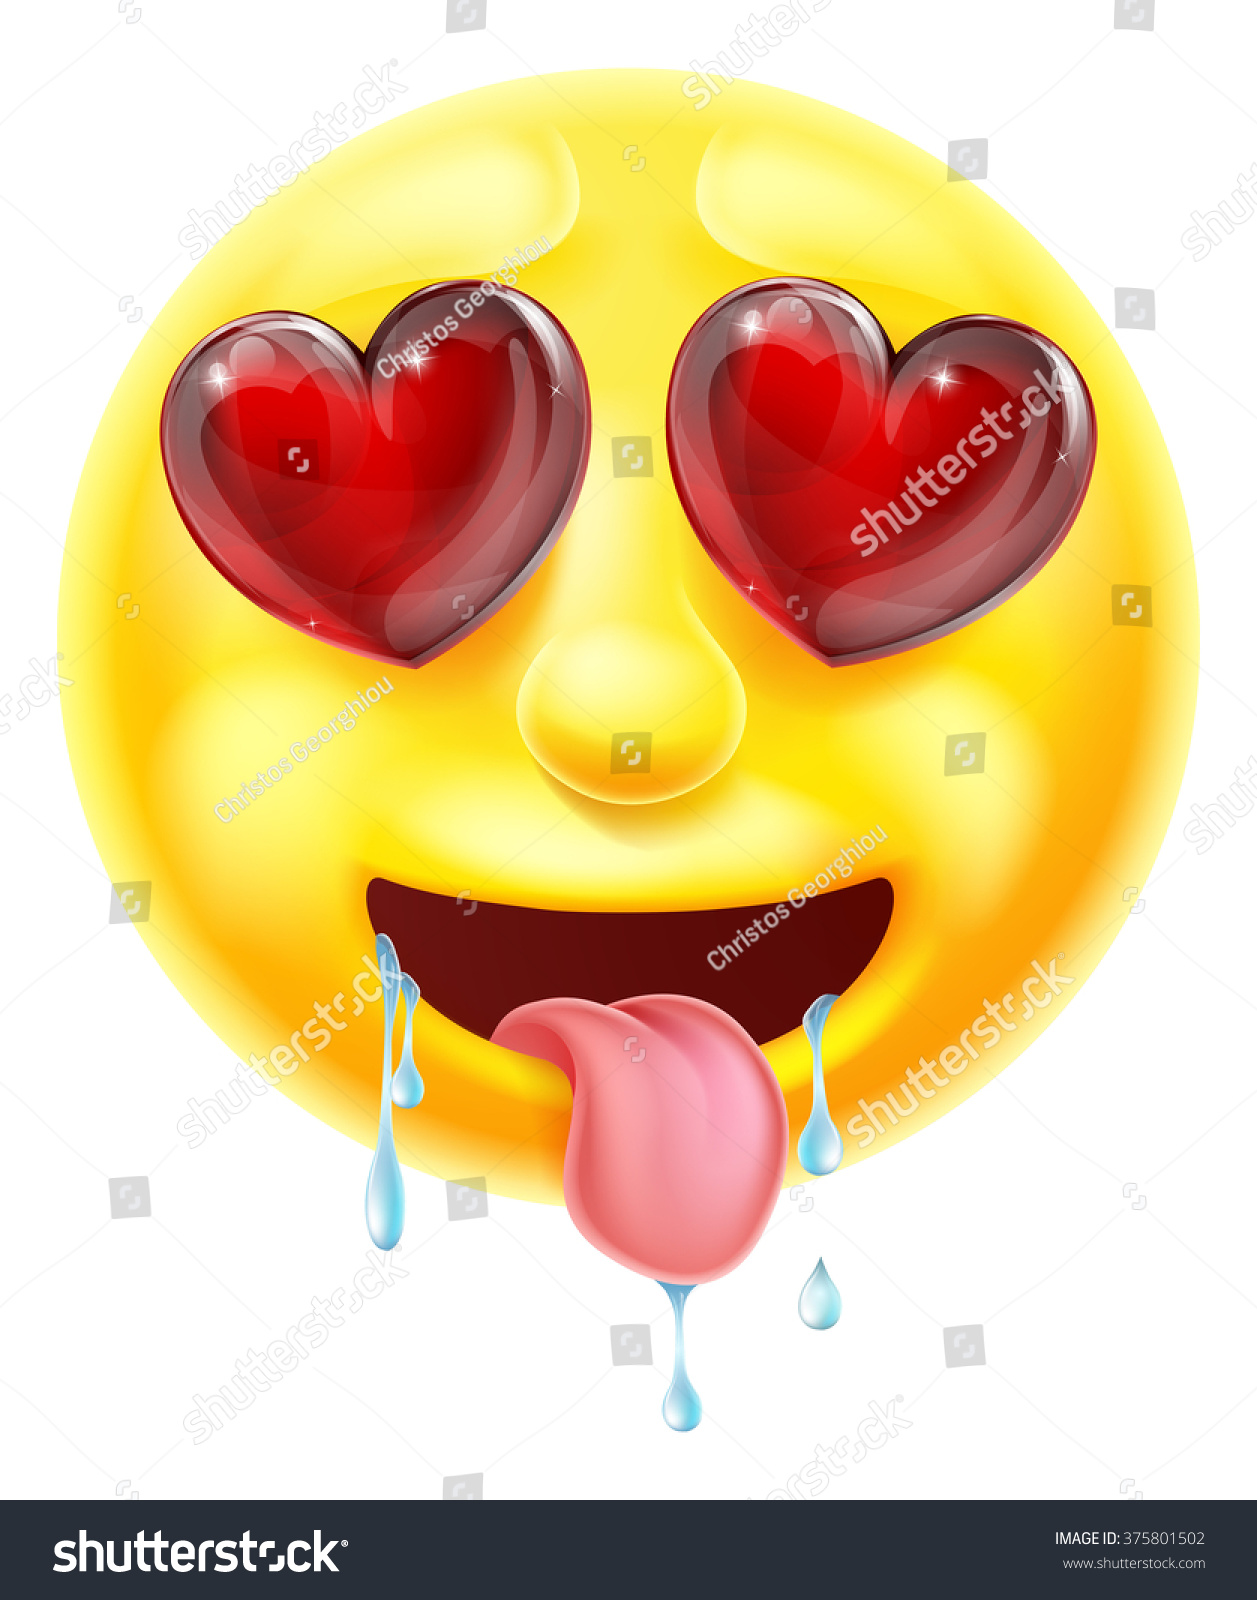 A Cartoon Emoji Emoticon Smiley Face Character In Love Or Lusting After Something With Hearts